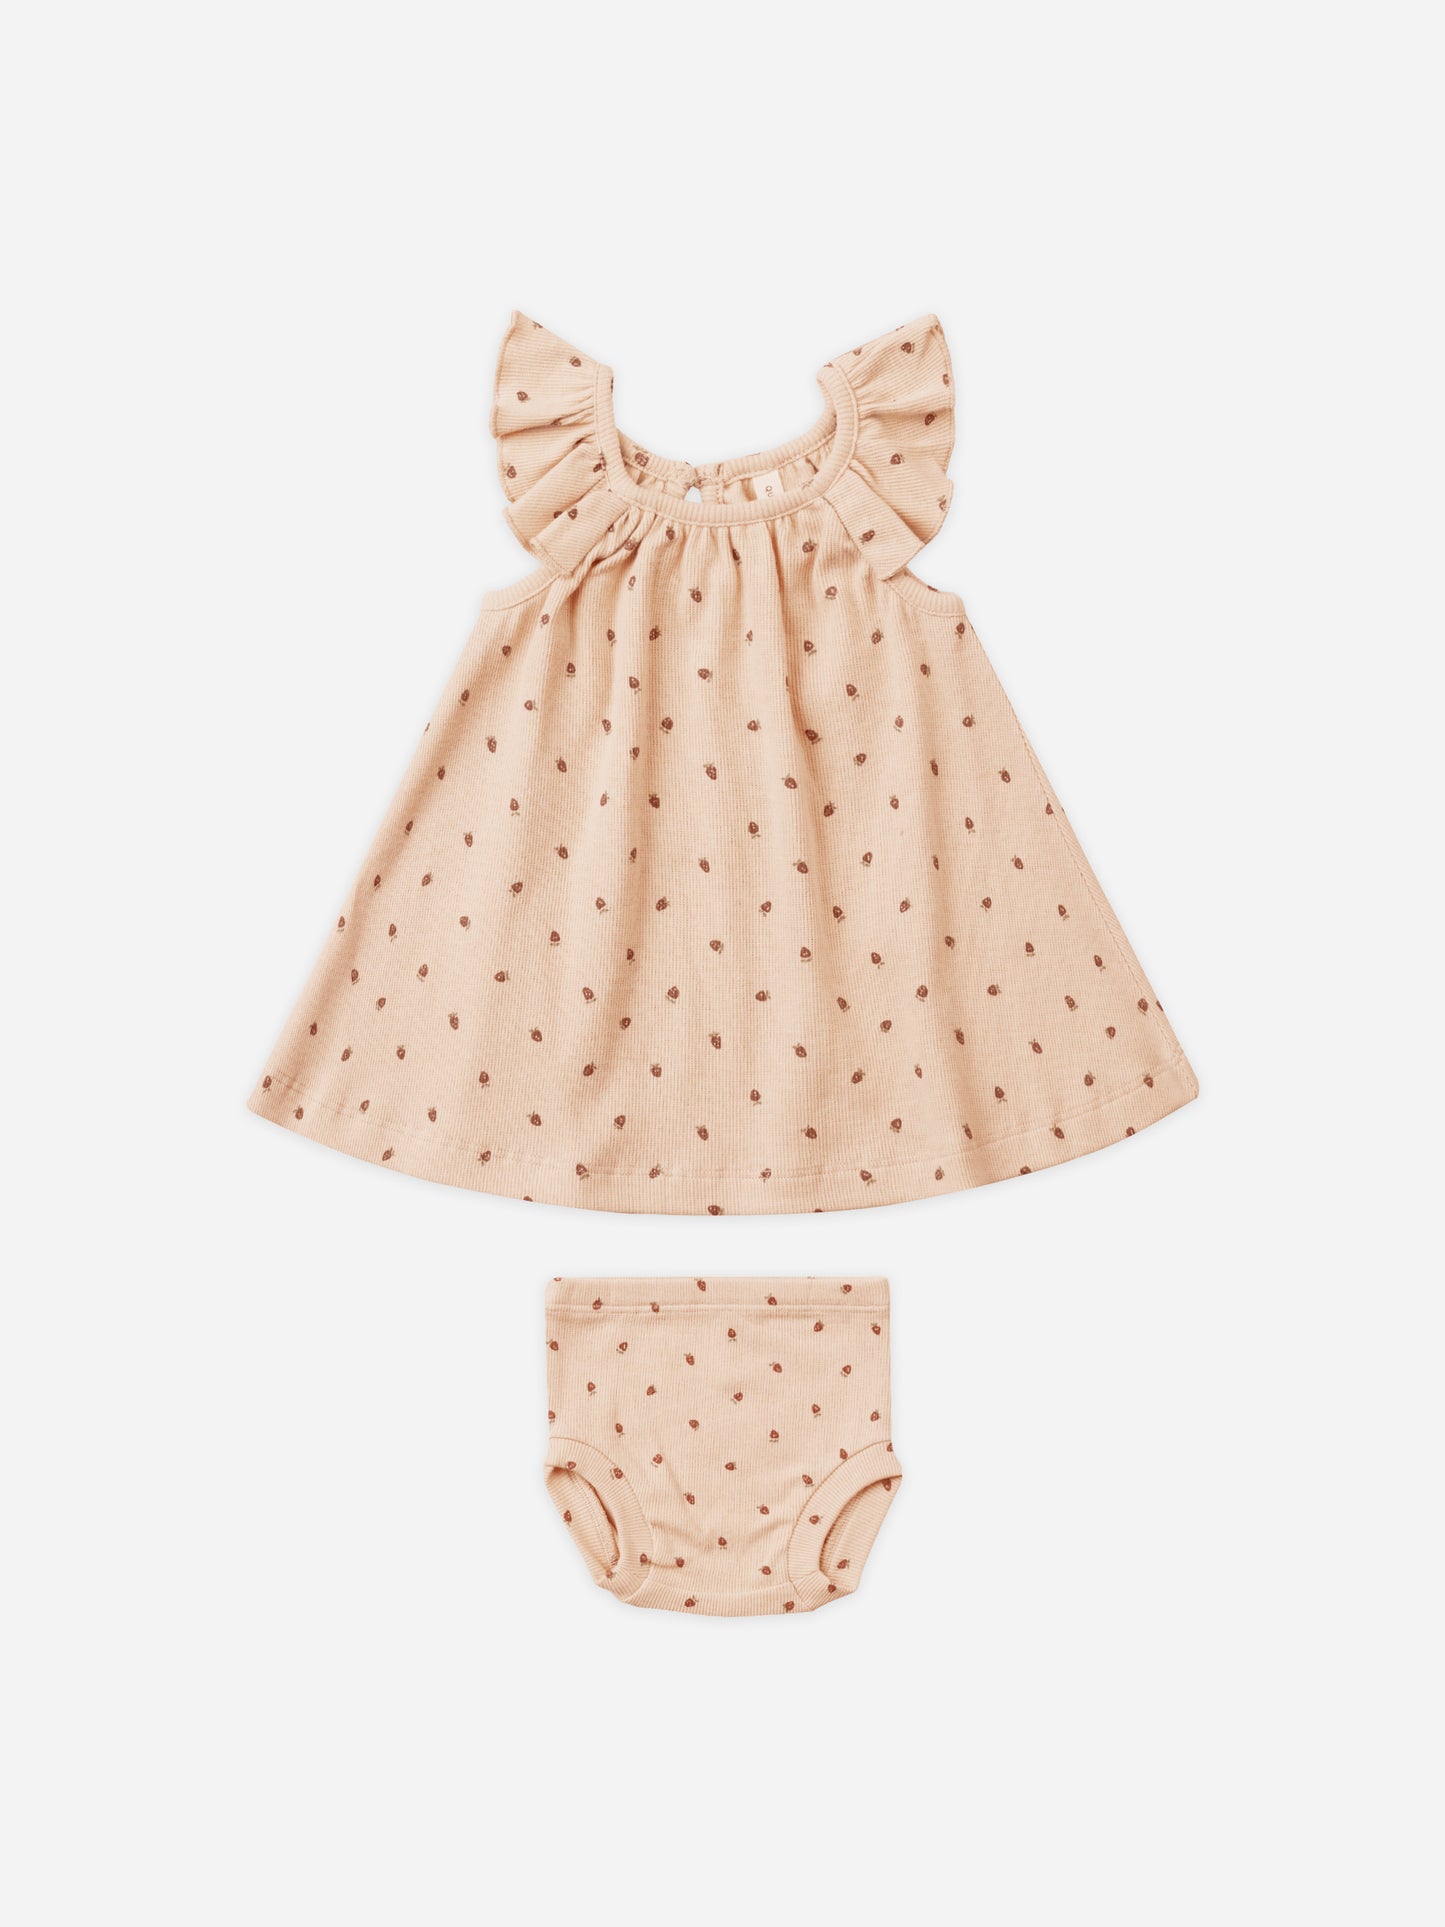 Ruffle Swing Dress || Strawberries - Rylee + Cru | Kids Clothes | Trendy Baby Clothes | Modern Infant Outfits |